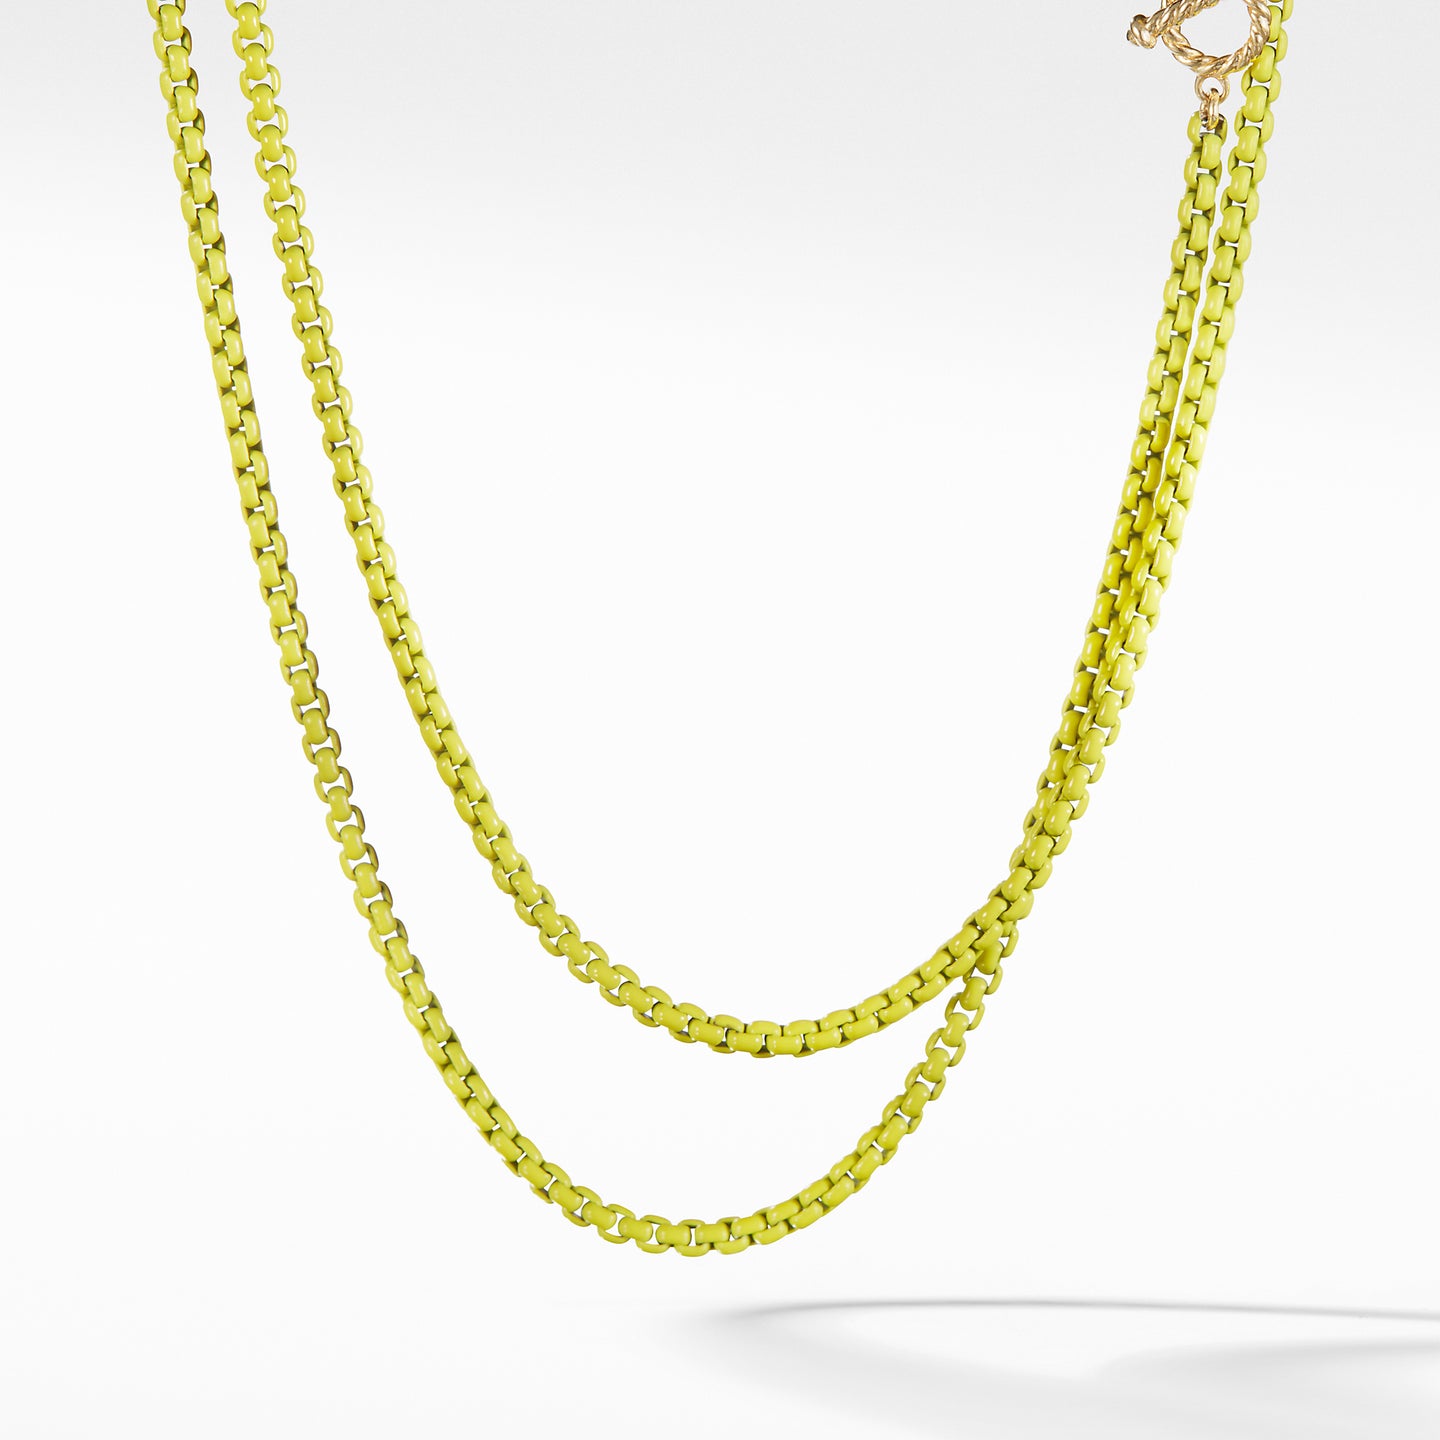 DY Bel Aire Chain Necklace in Yellow with 14K Gold Accents, 41